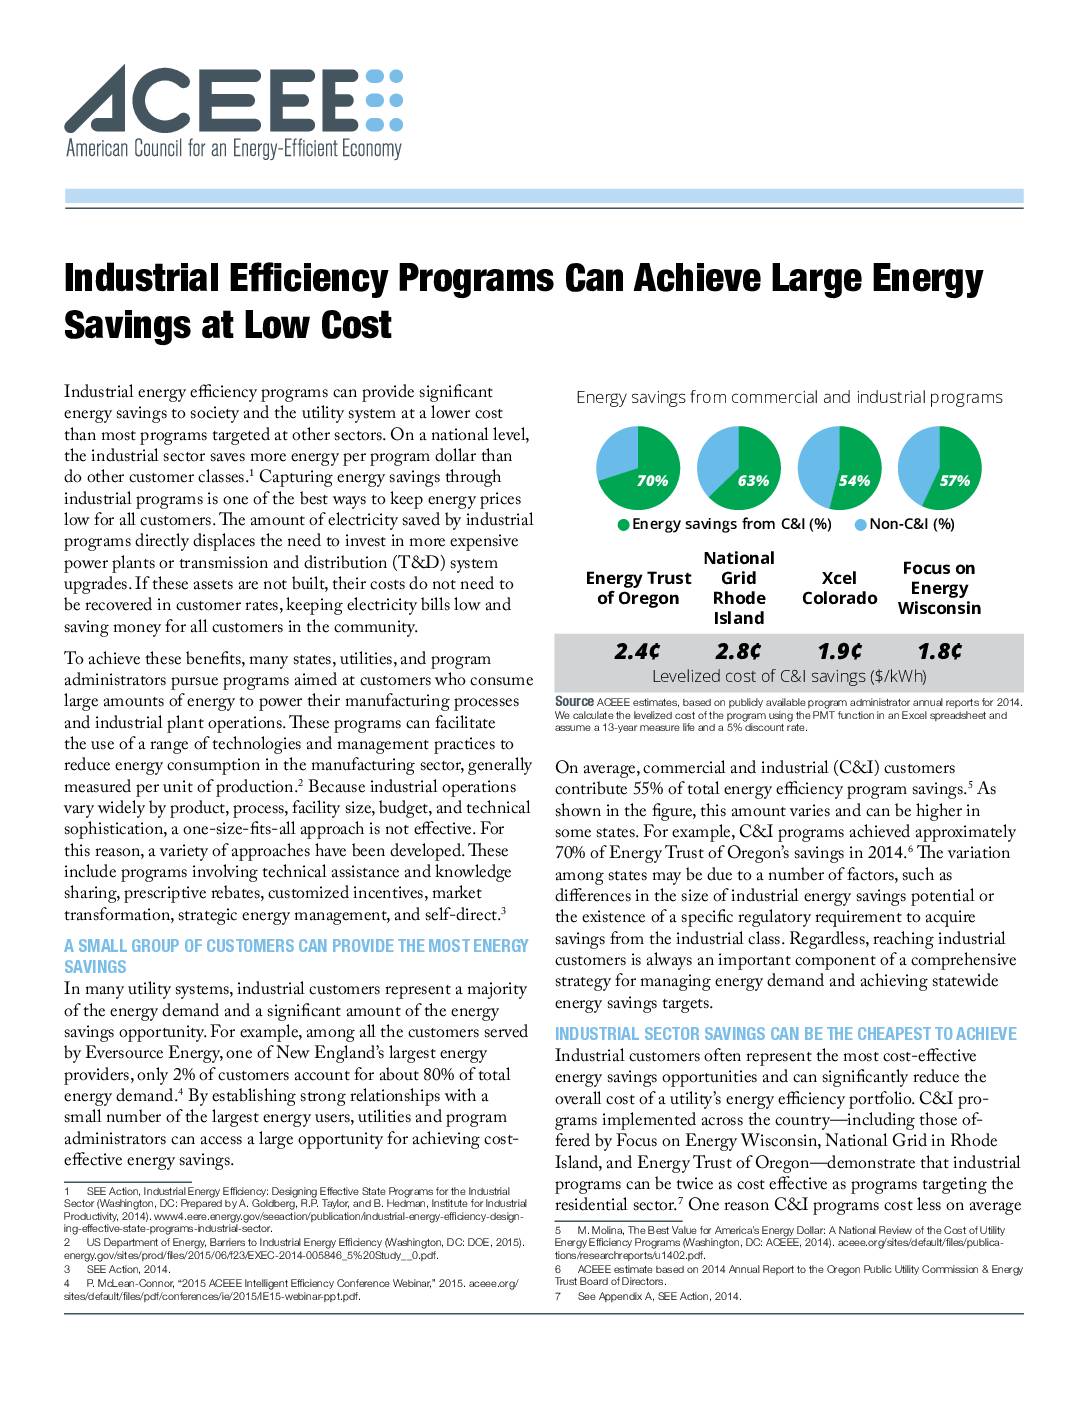 Industrial Efficiency Programs Can Achieve Large Energy Savings at Low Cost